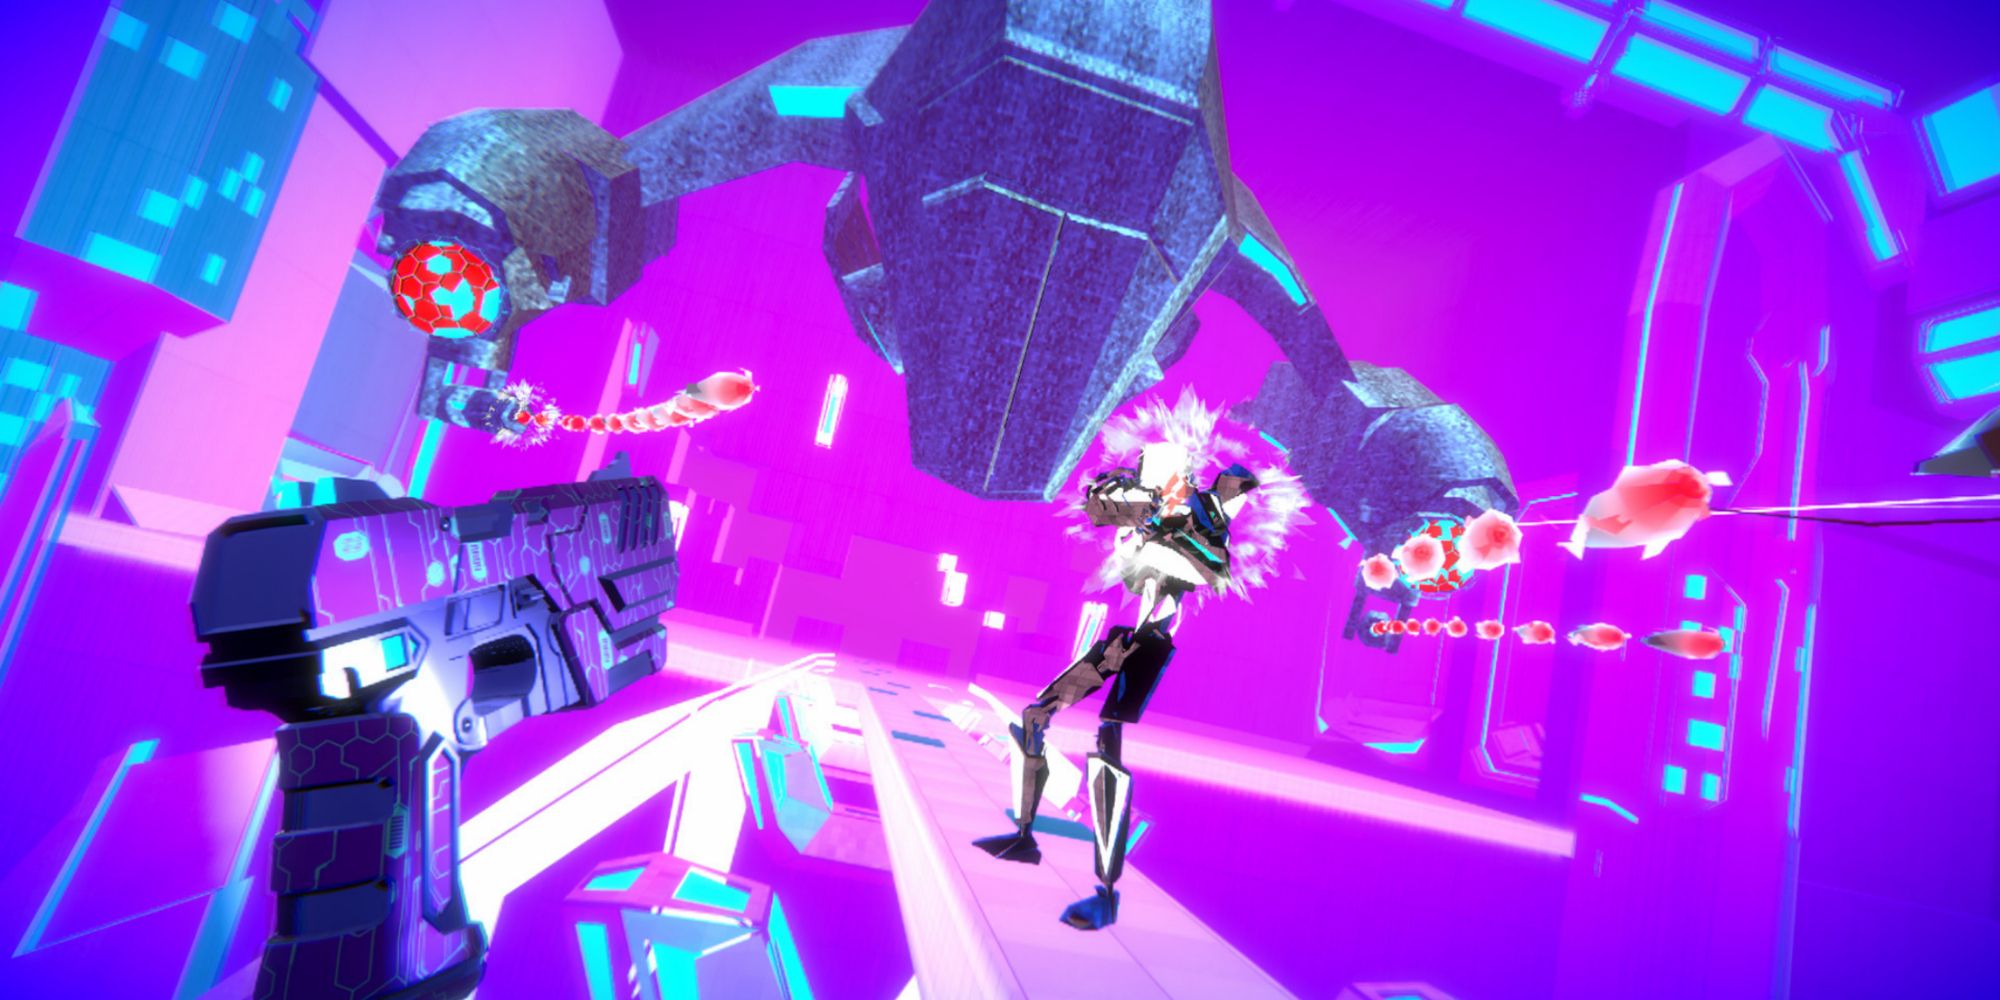 The player shoots a gun at a robot in a bright neon synth world